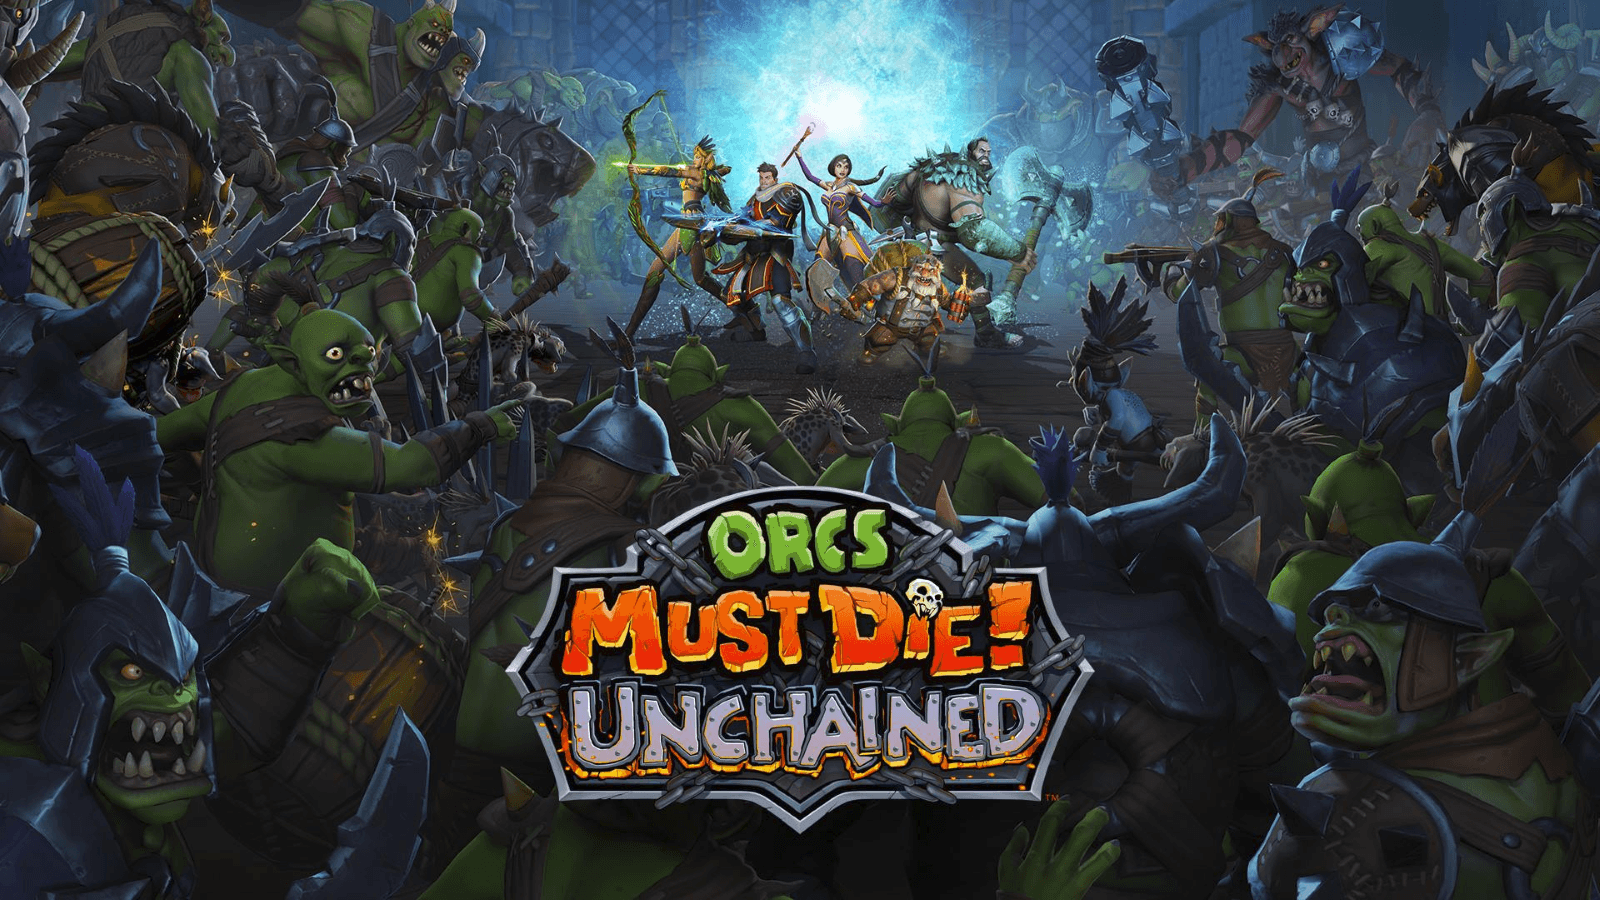 Orcs Must Die! Unchained Open Beta Launches March 29th